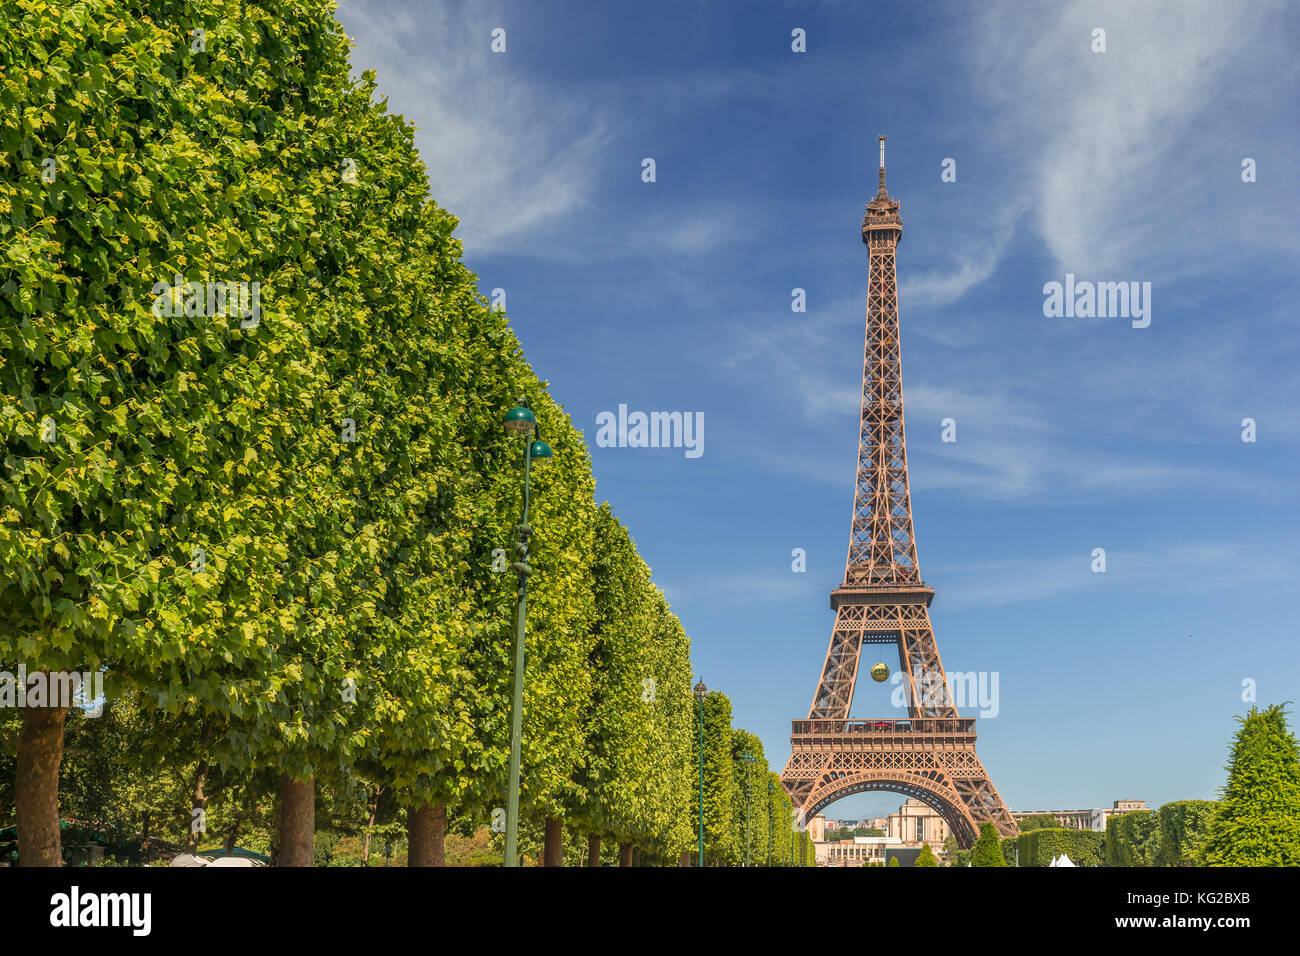 The most famous landmark in the world Stock Photo